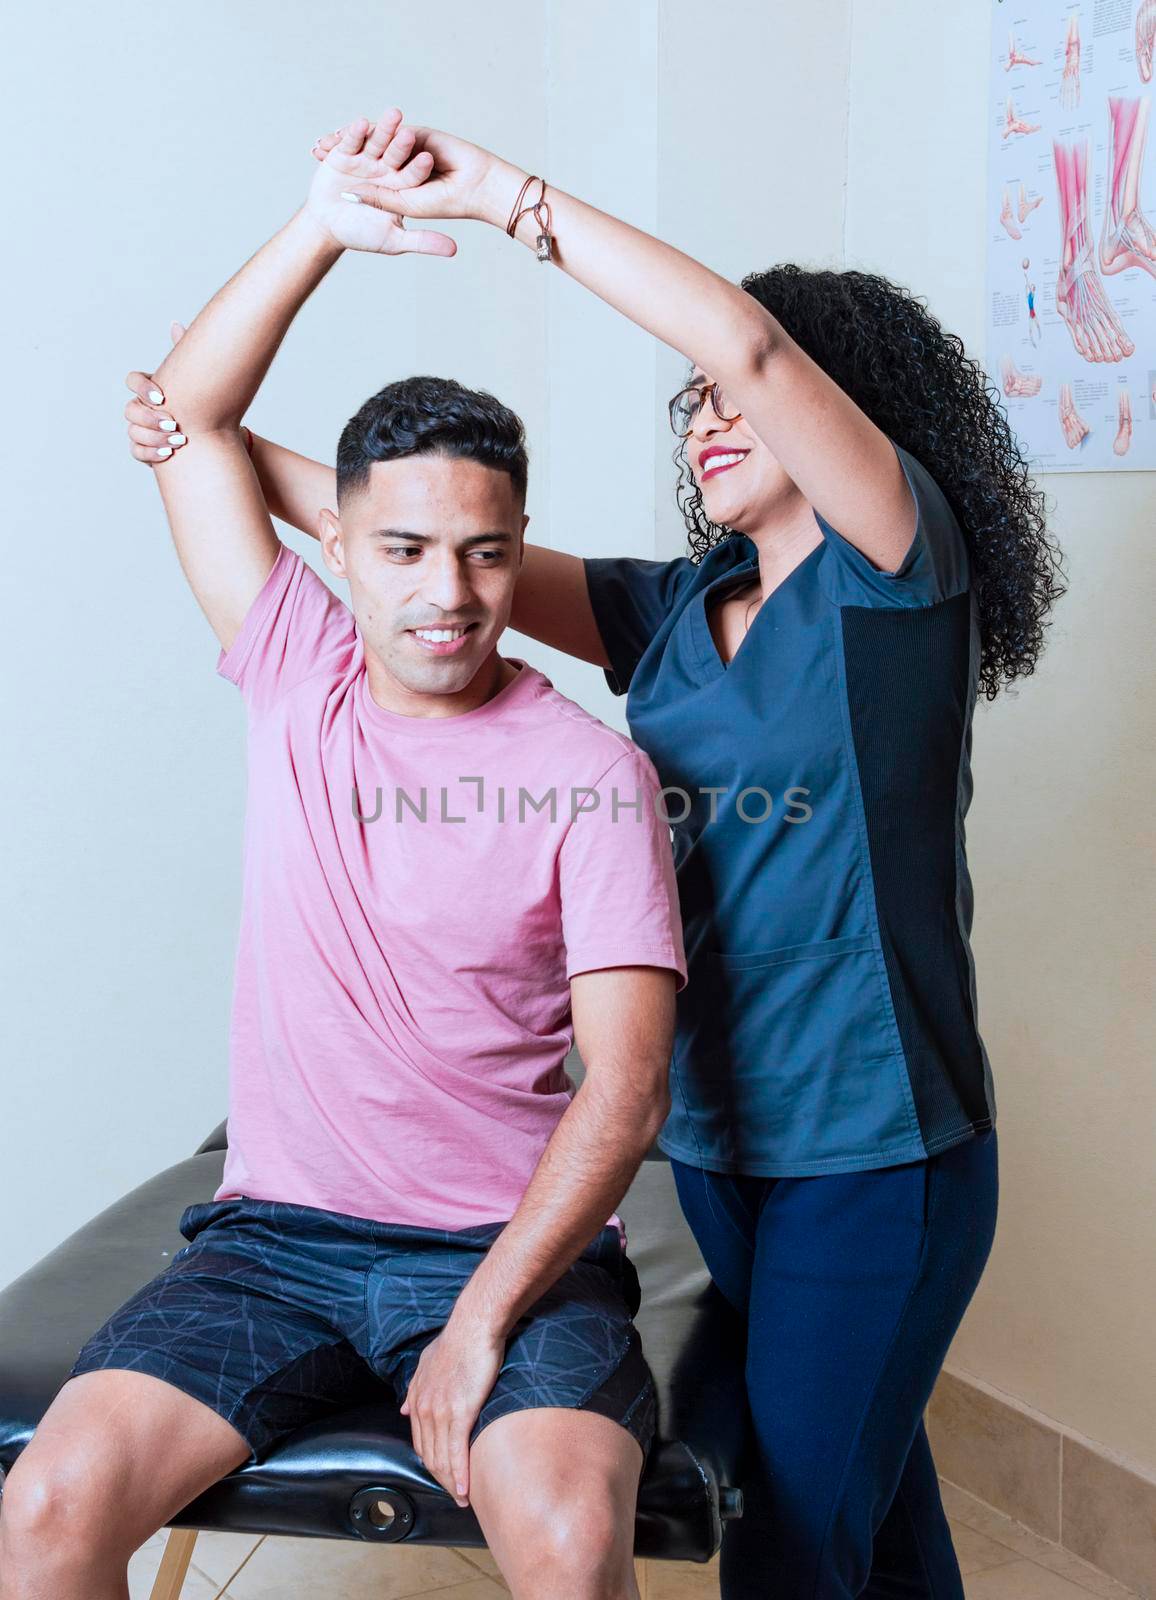 shoulder and elbow physical therapy, shoulder assessment physical therapist, elbow rehabilitation physical therapy, by isaiphoto